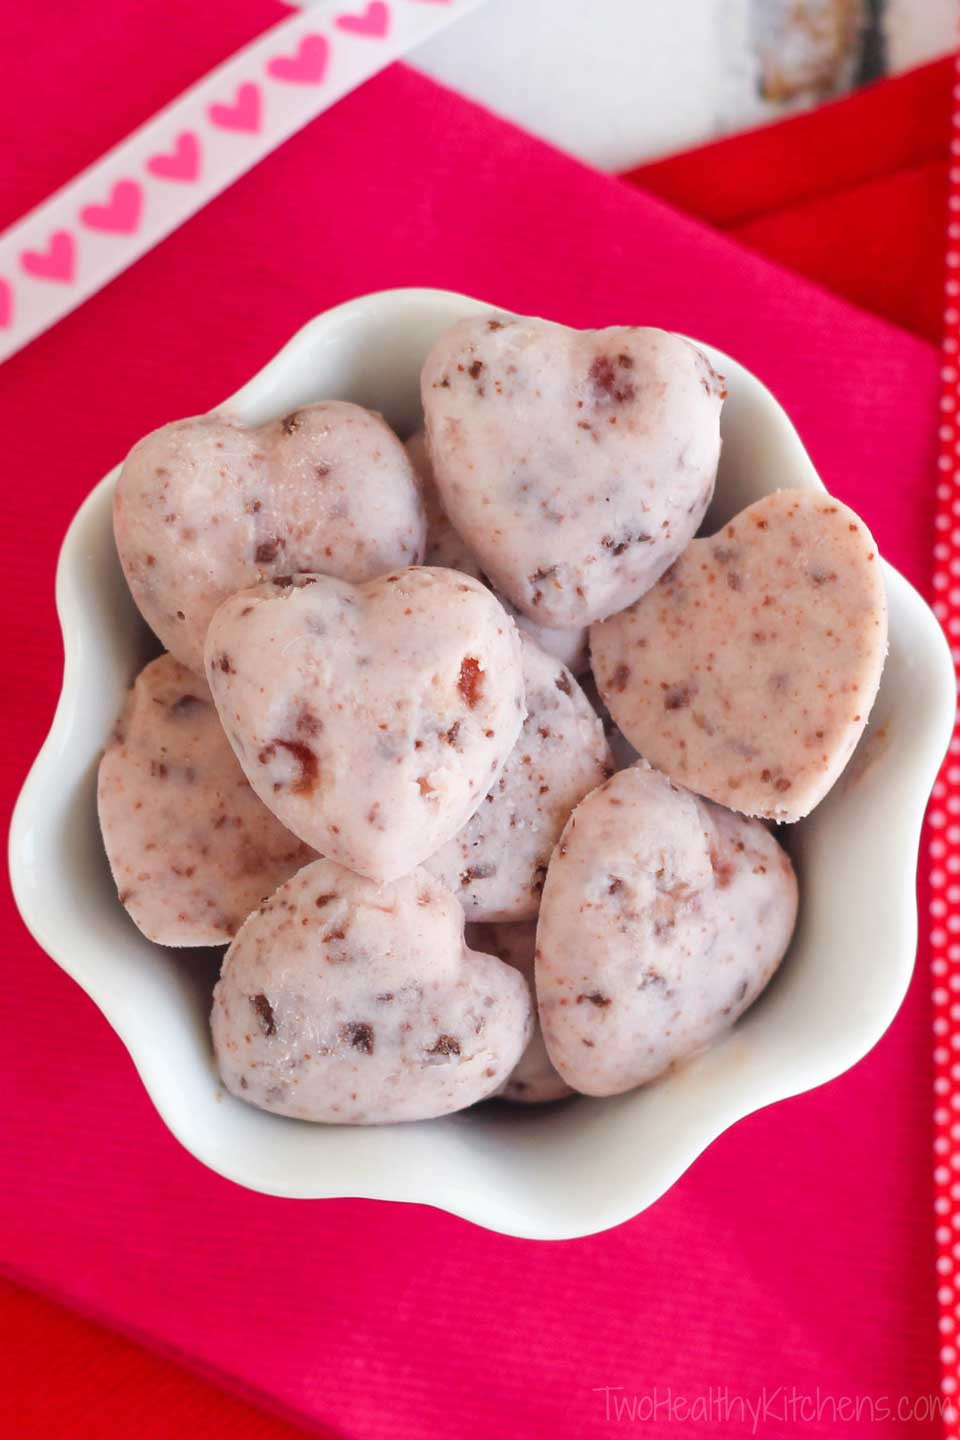 Healthy Valentine'S Day Snacks
 Easy Healthy Valentine s Day Treats and Snacks Two